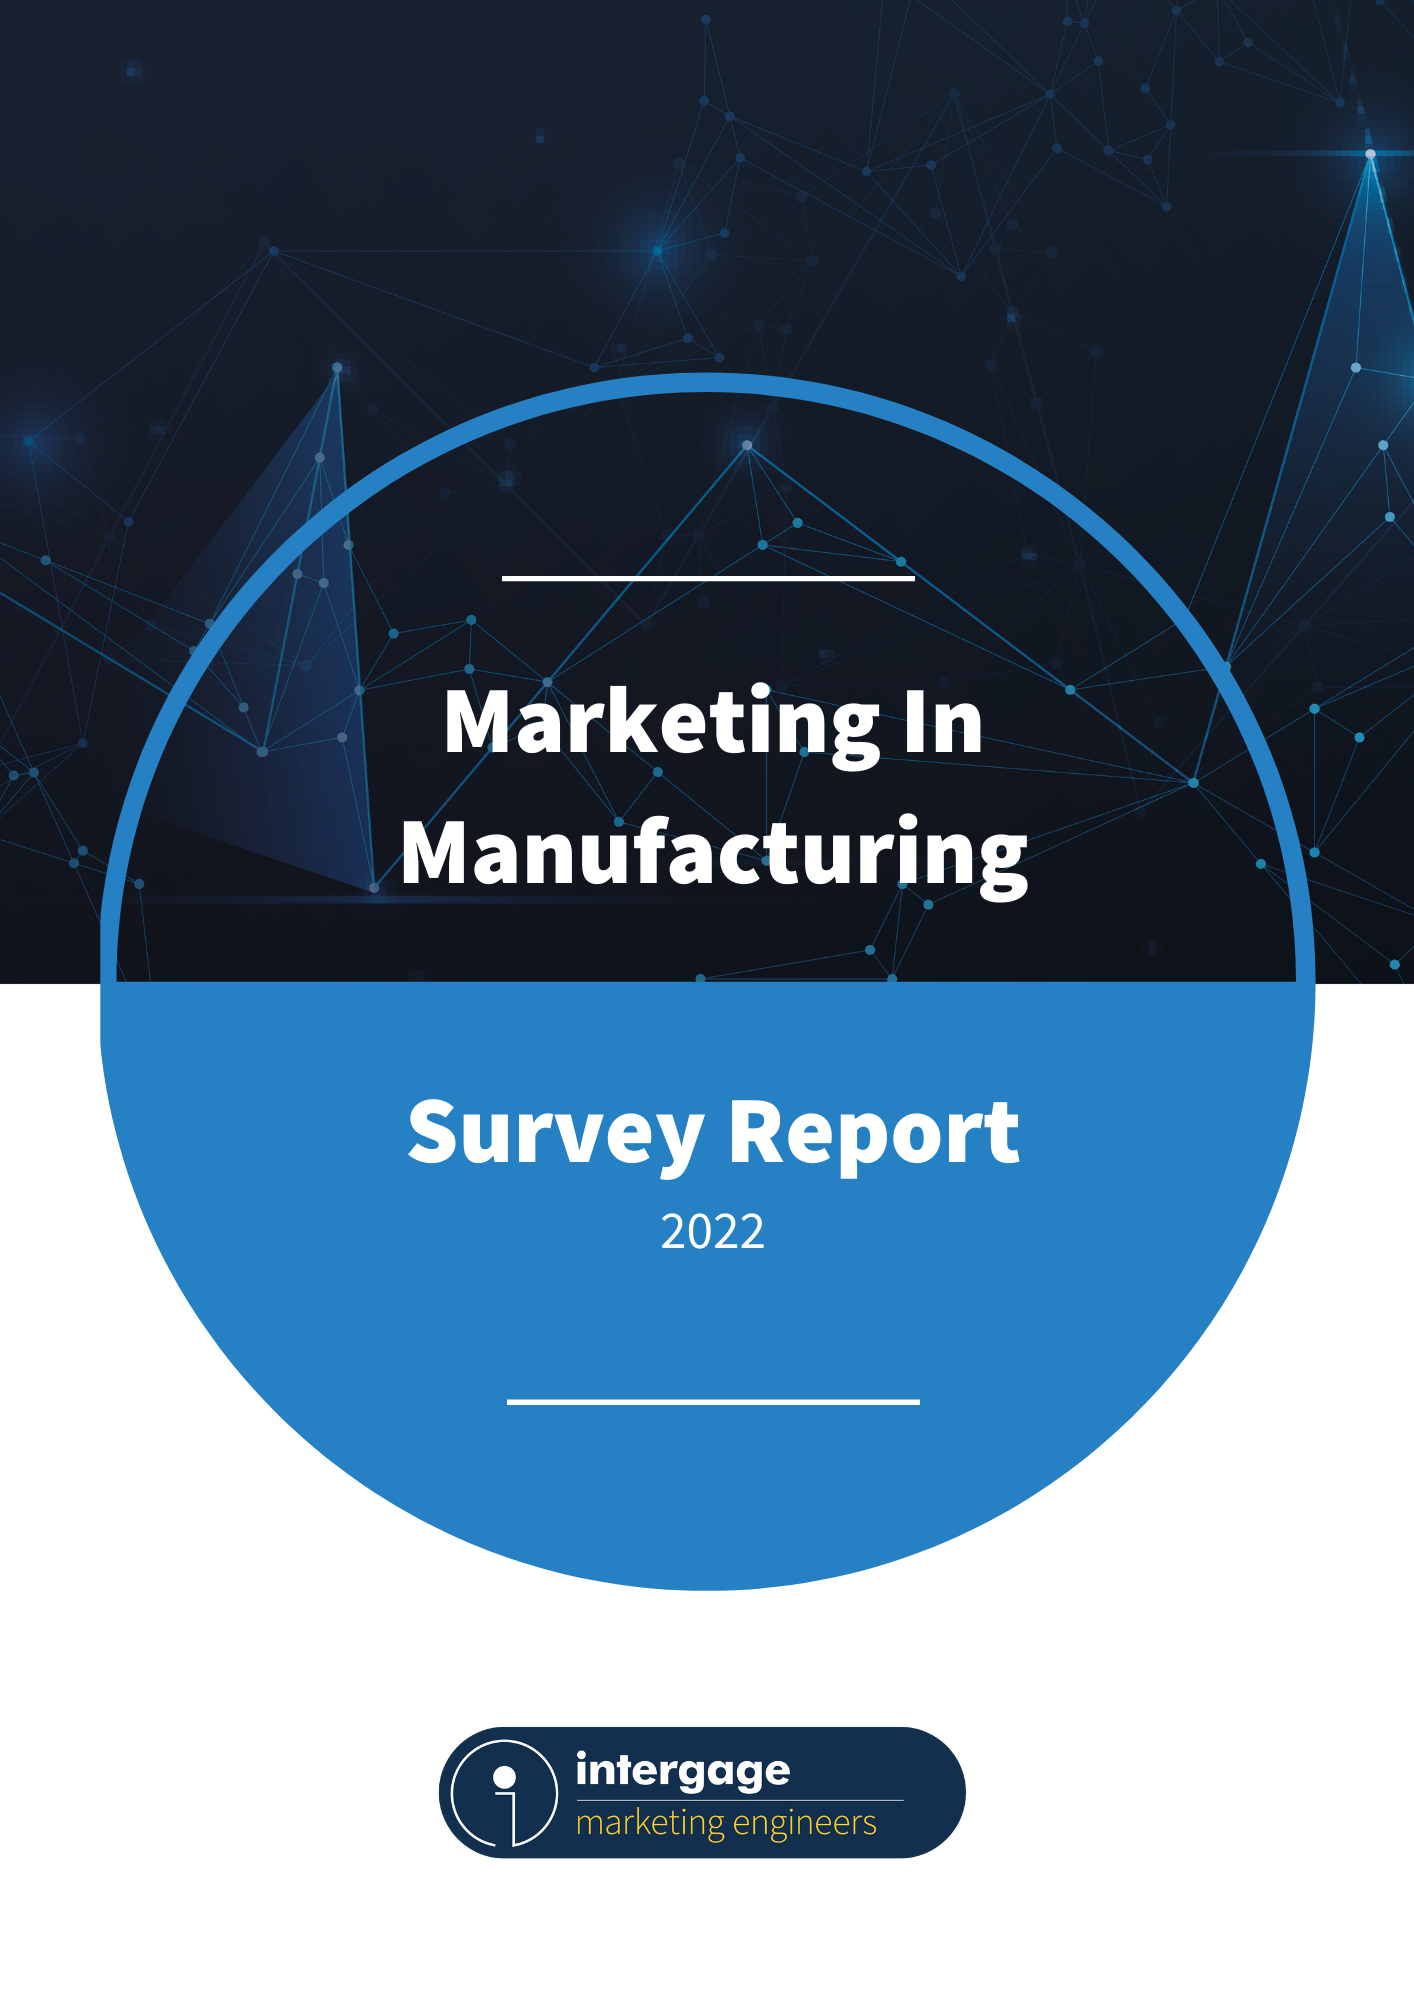 The marketing in manufacturing report cover